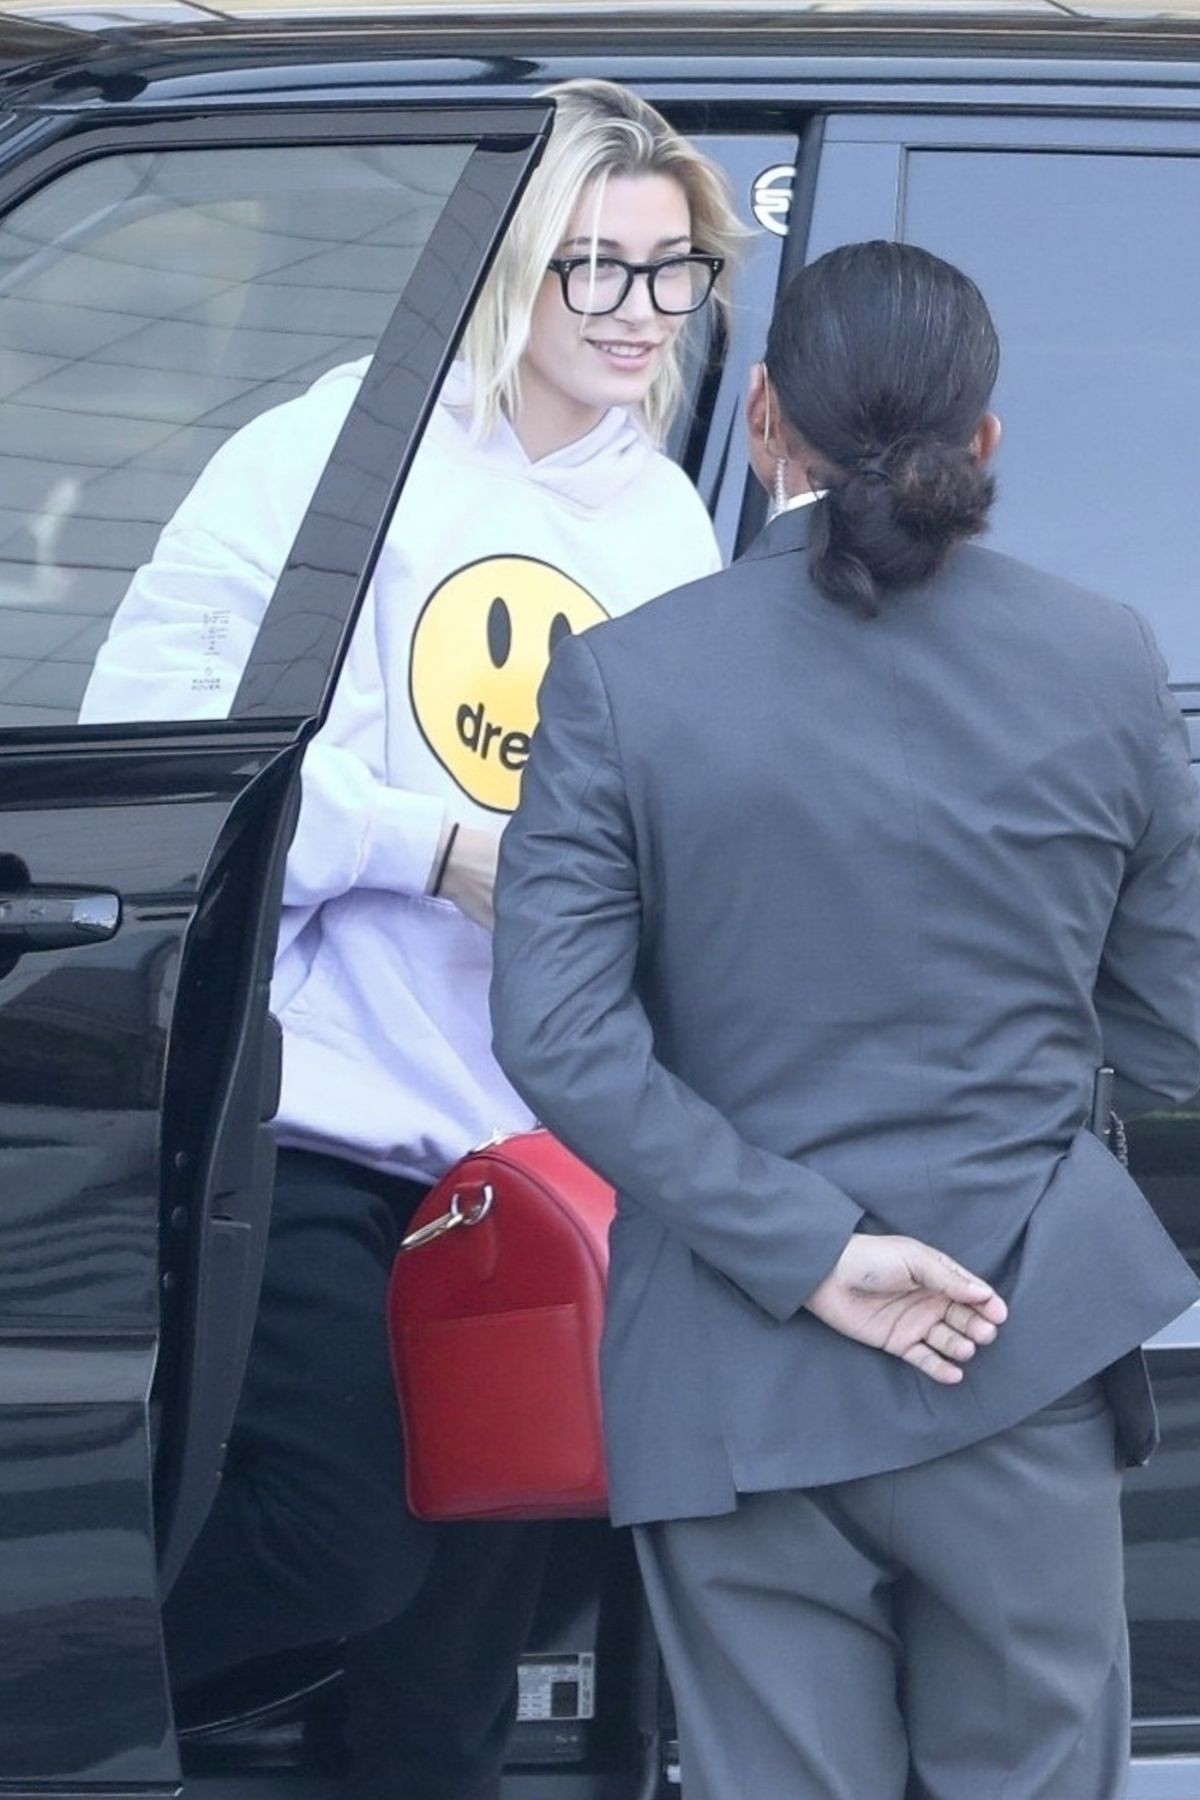 hailey-baldwin-arrives-at-montage-hotel-in-beverly-hills-03-26-2019-3.jpg